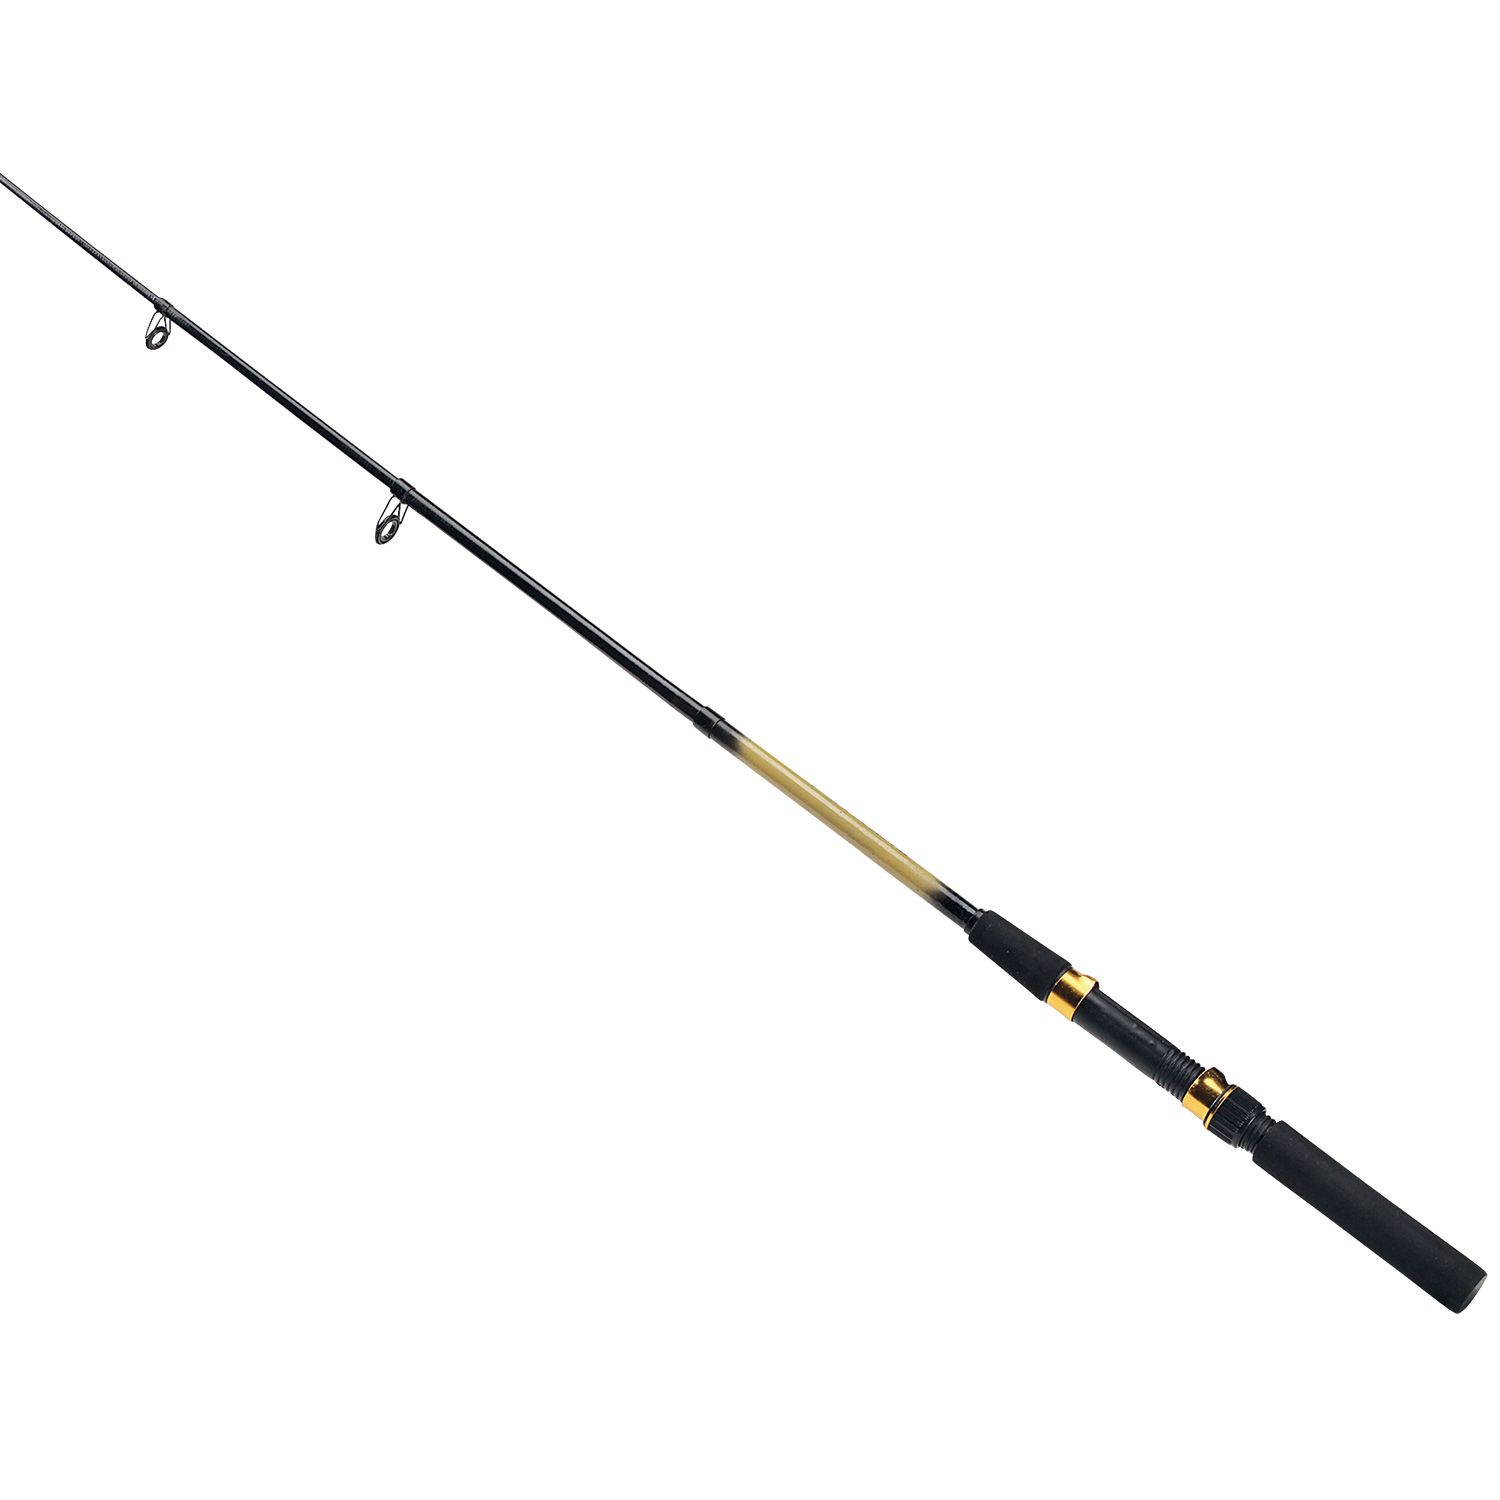 Fishing pole 0 images about camping hiking clip art on - Clipartix